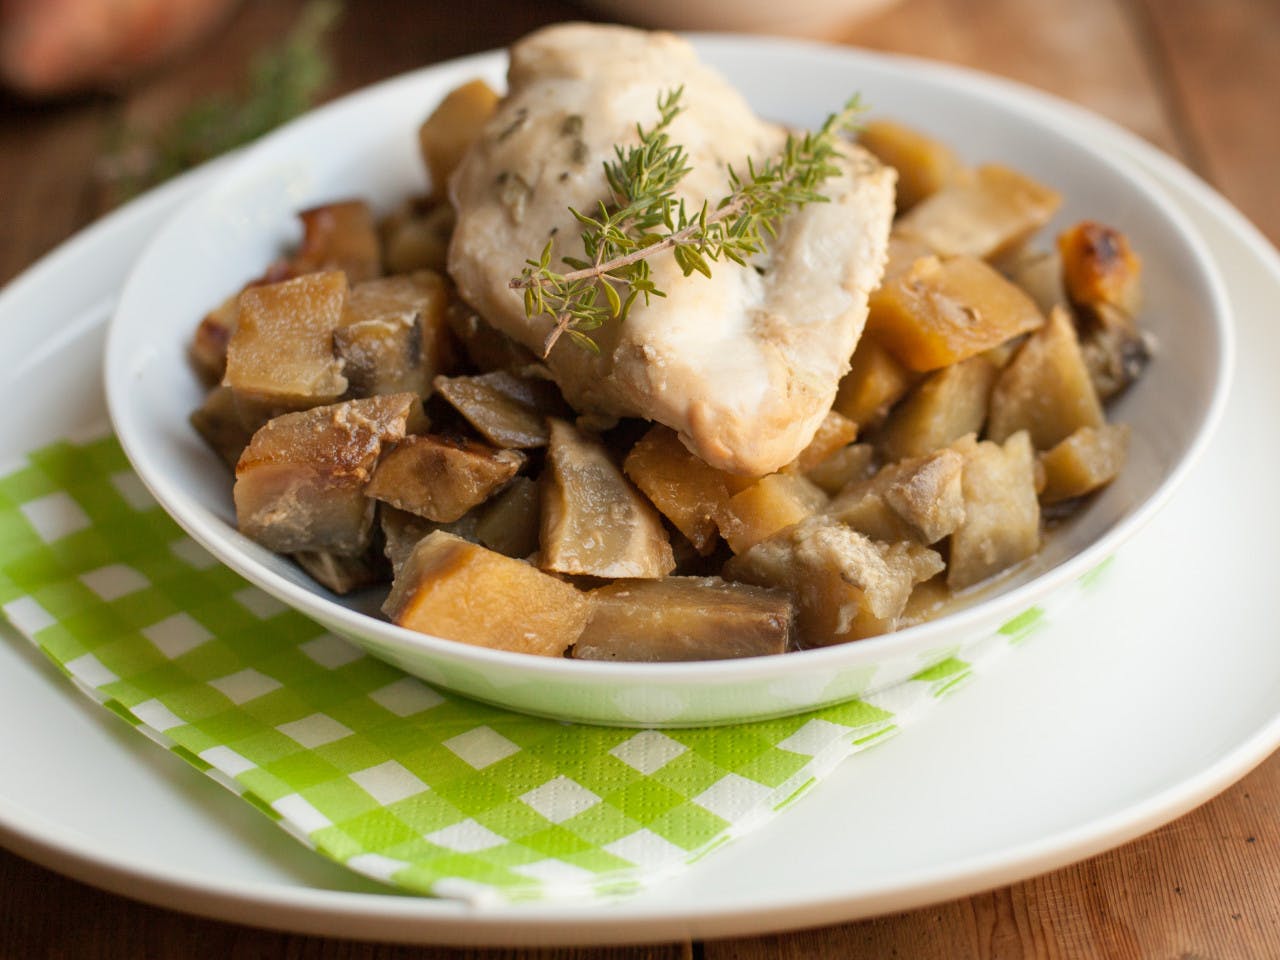 Honey mustard chicken from the slowcooker with sweet potato